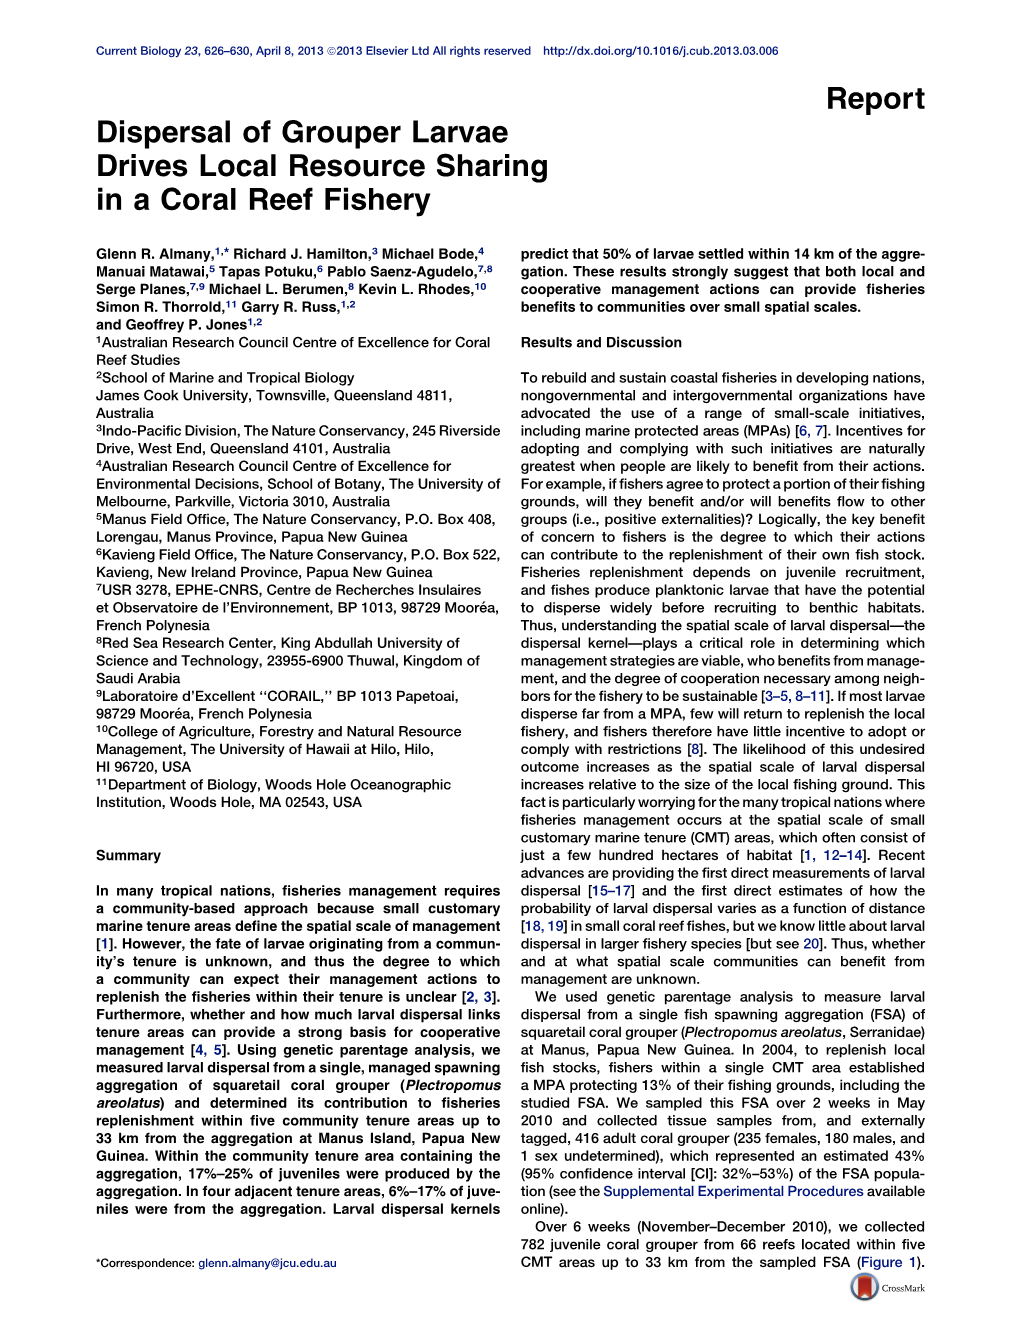 Dispersal of Grouper Larvae Drives Local Resource Sharing in a Coral Reef Fishery